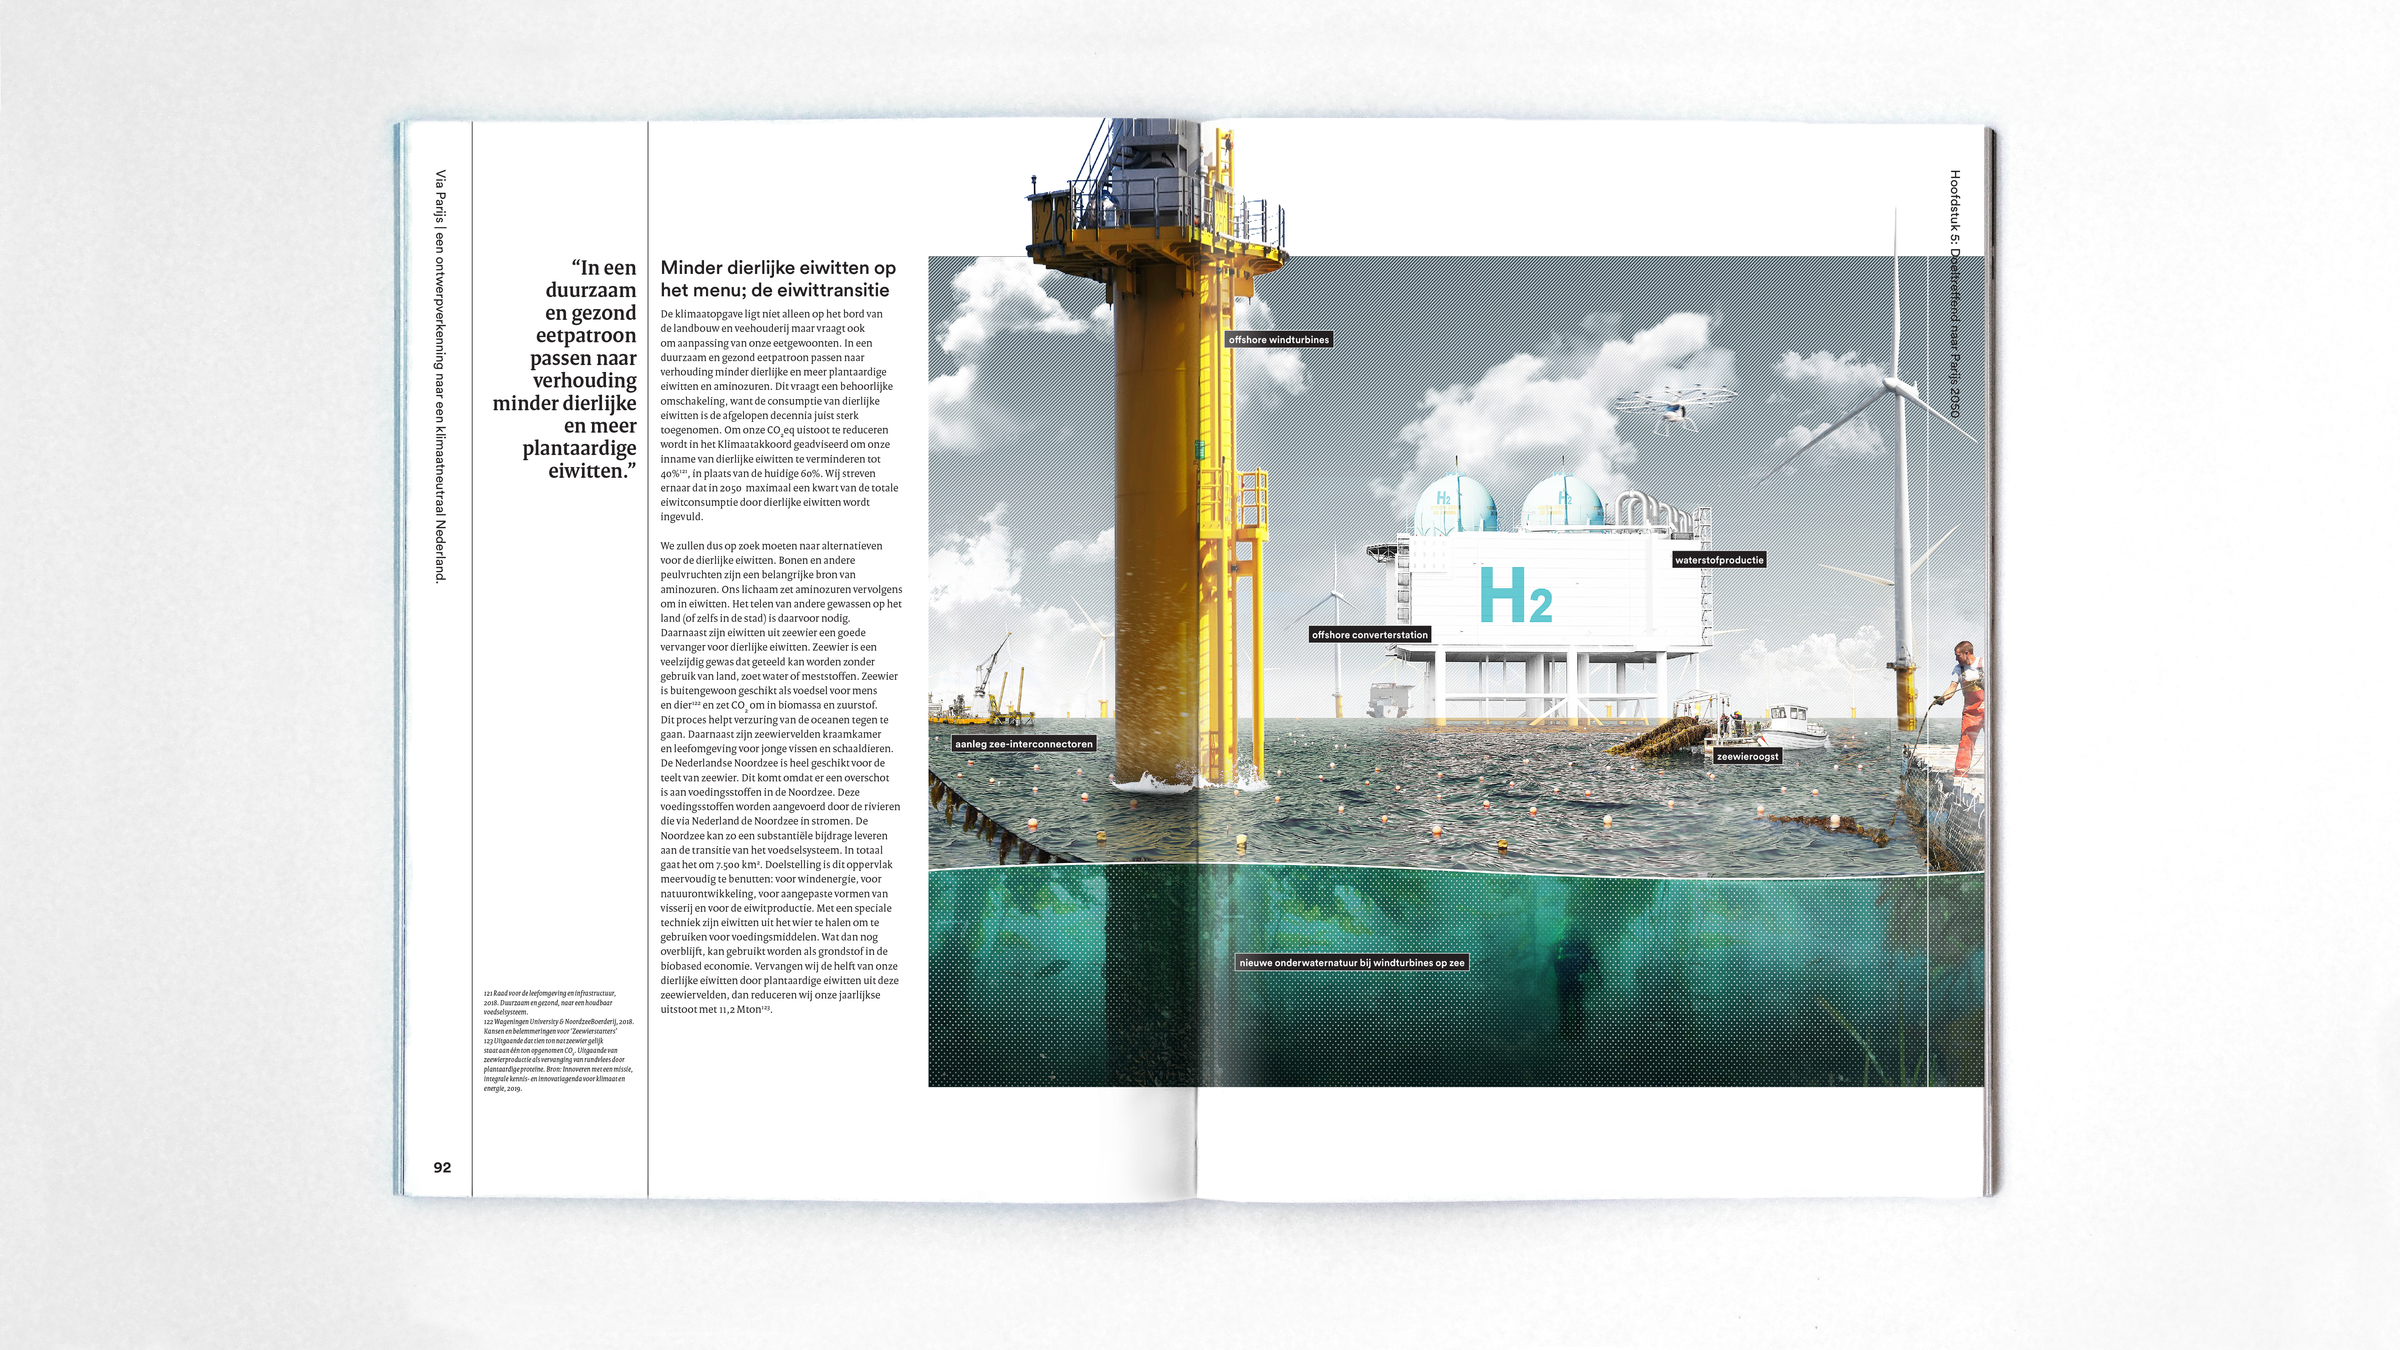 The future of the North Sea, wind turbine fields, seaweed cultivation and hydrogen conversion